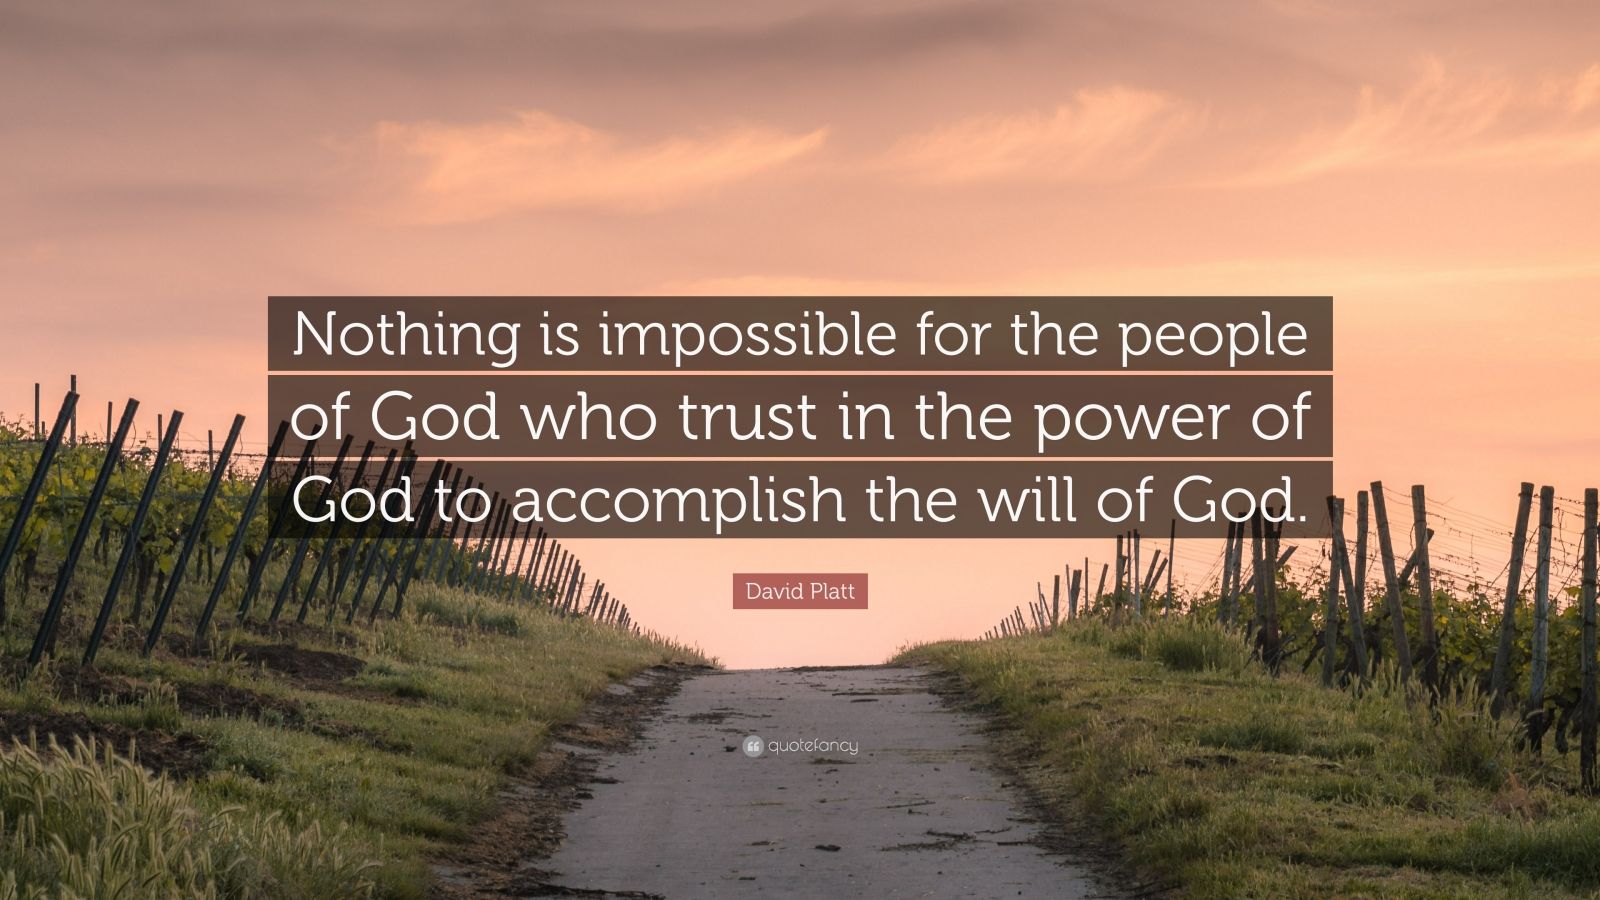 David Platt Quote: “Nothing is impossible for the people of God who ...